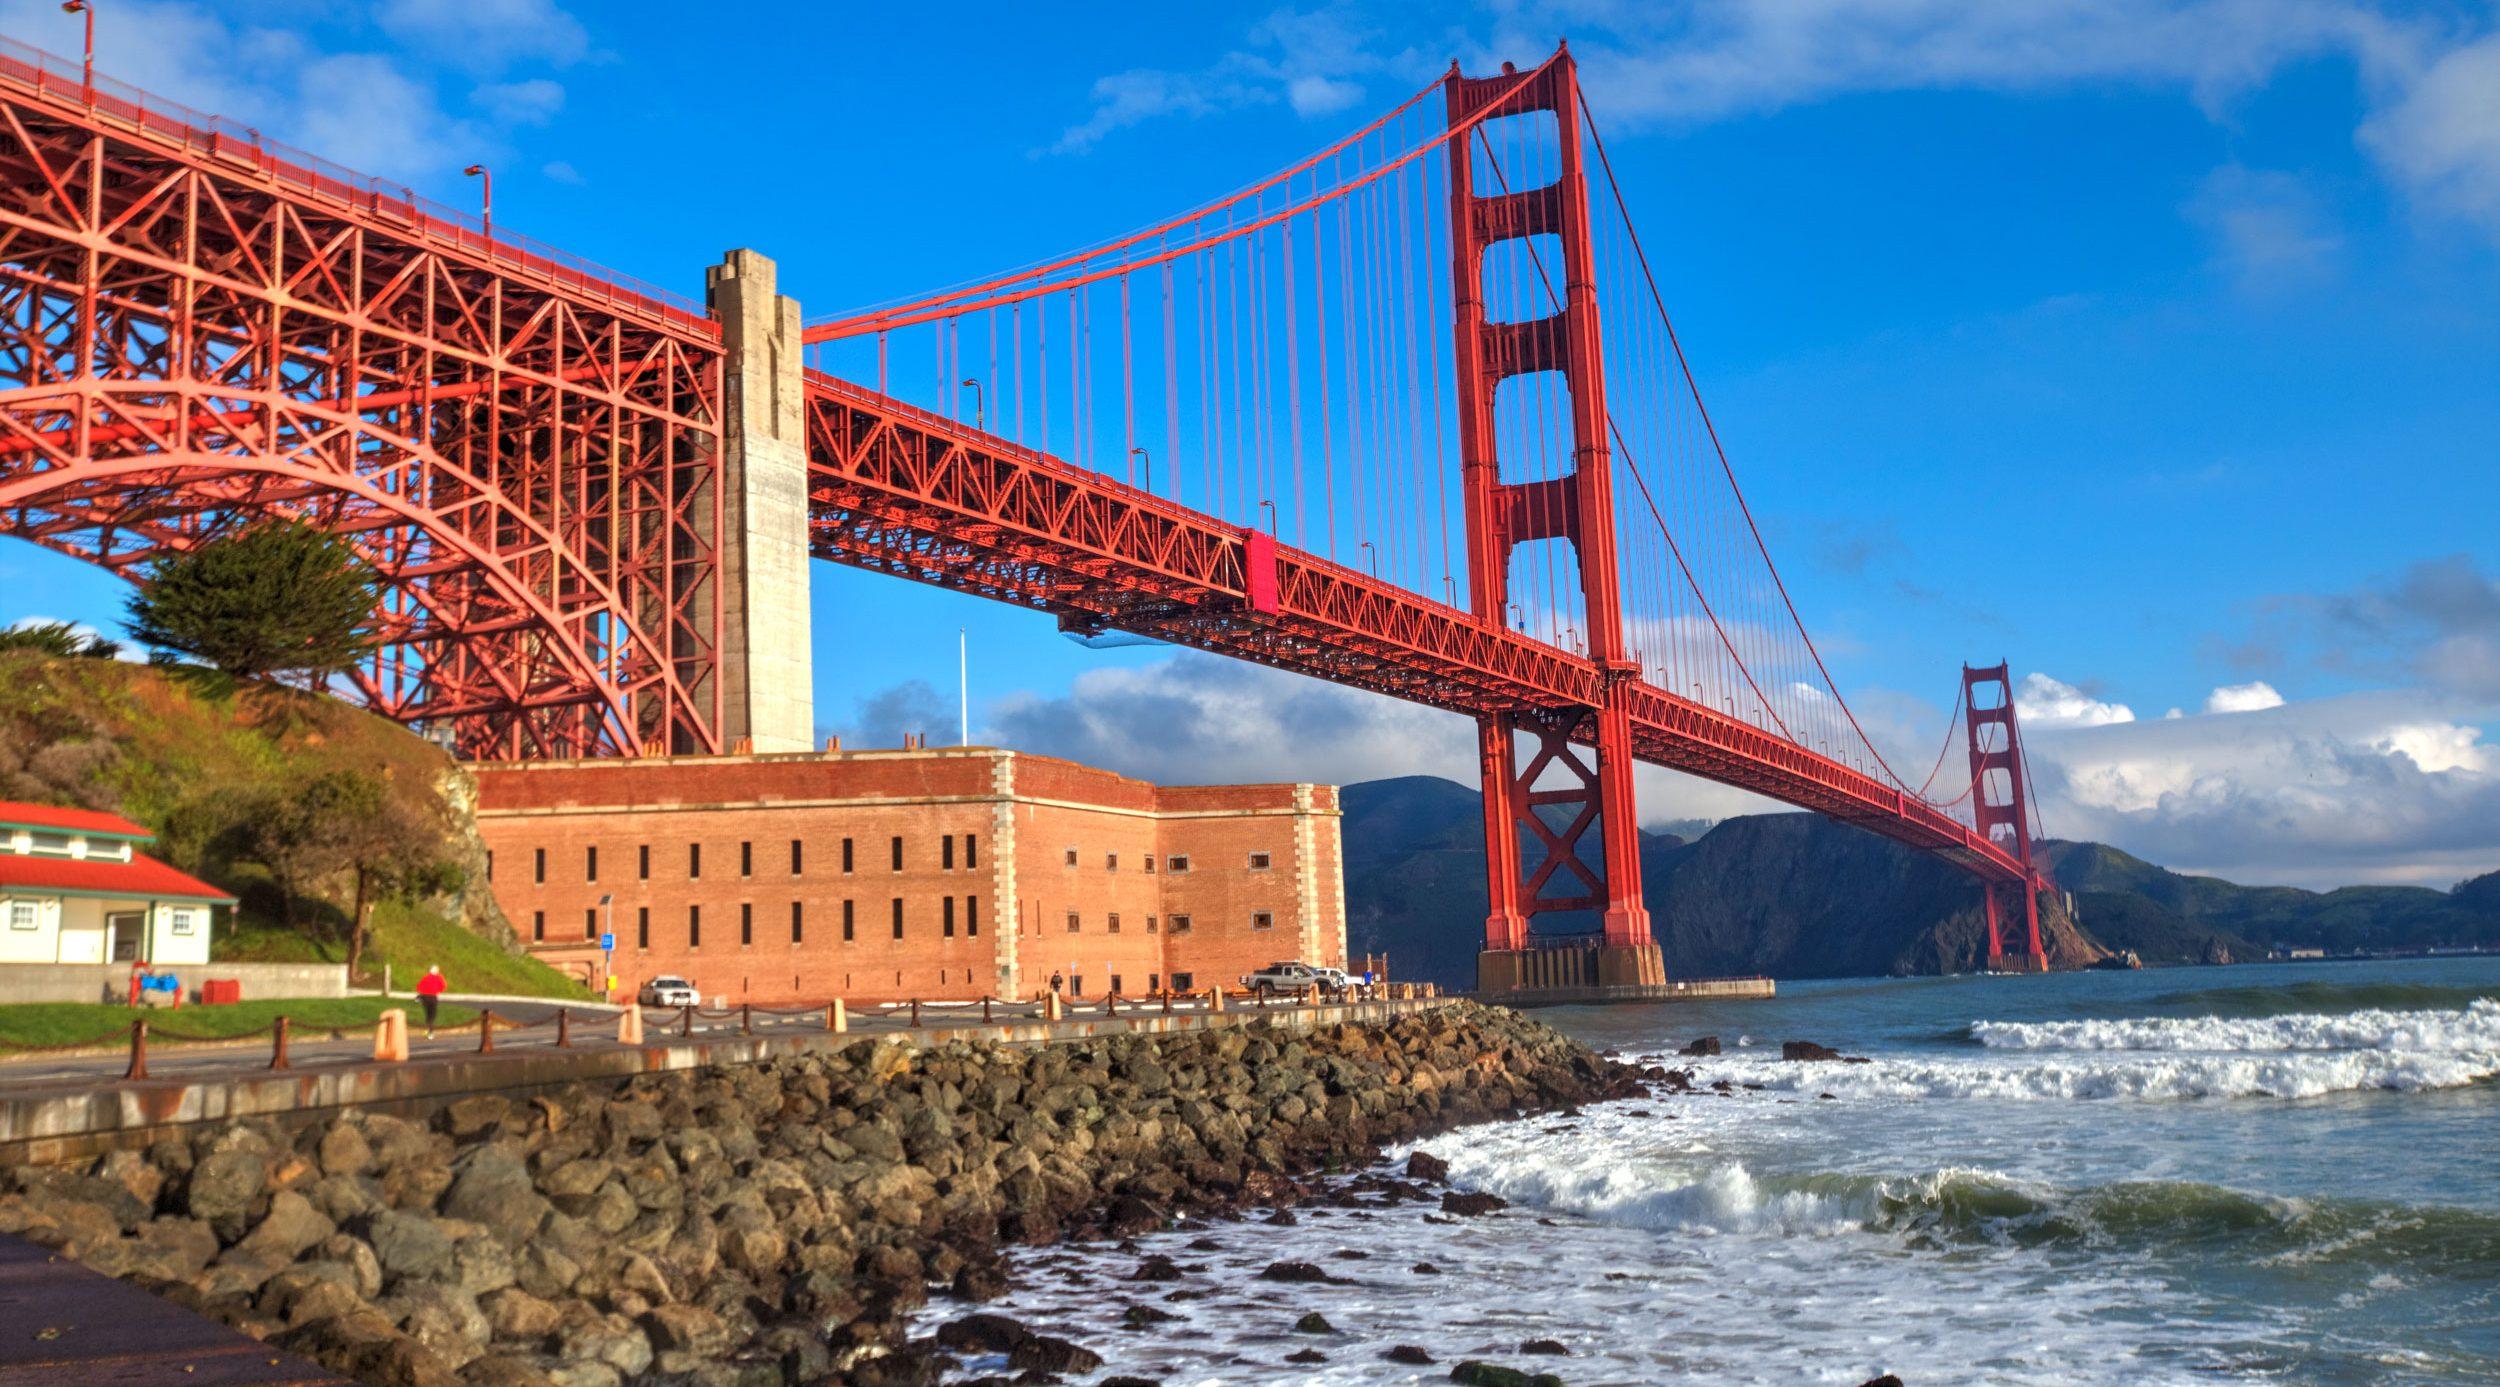 Fort Point National Historic Site exterior with the Golden Gate Bridge in the background. Phot by Marlin Lum.